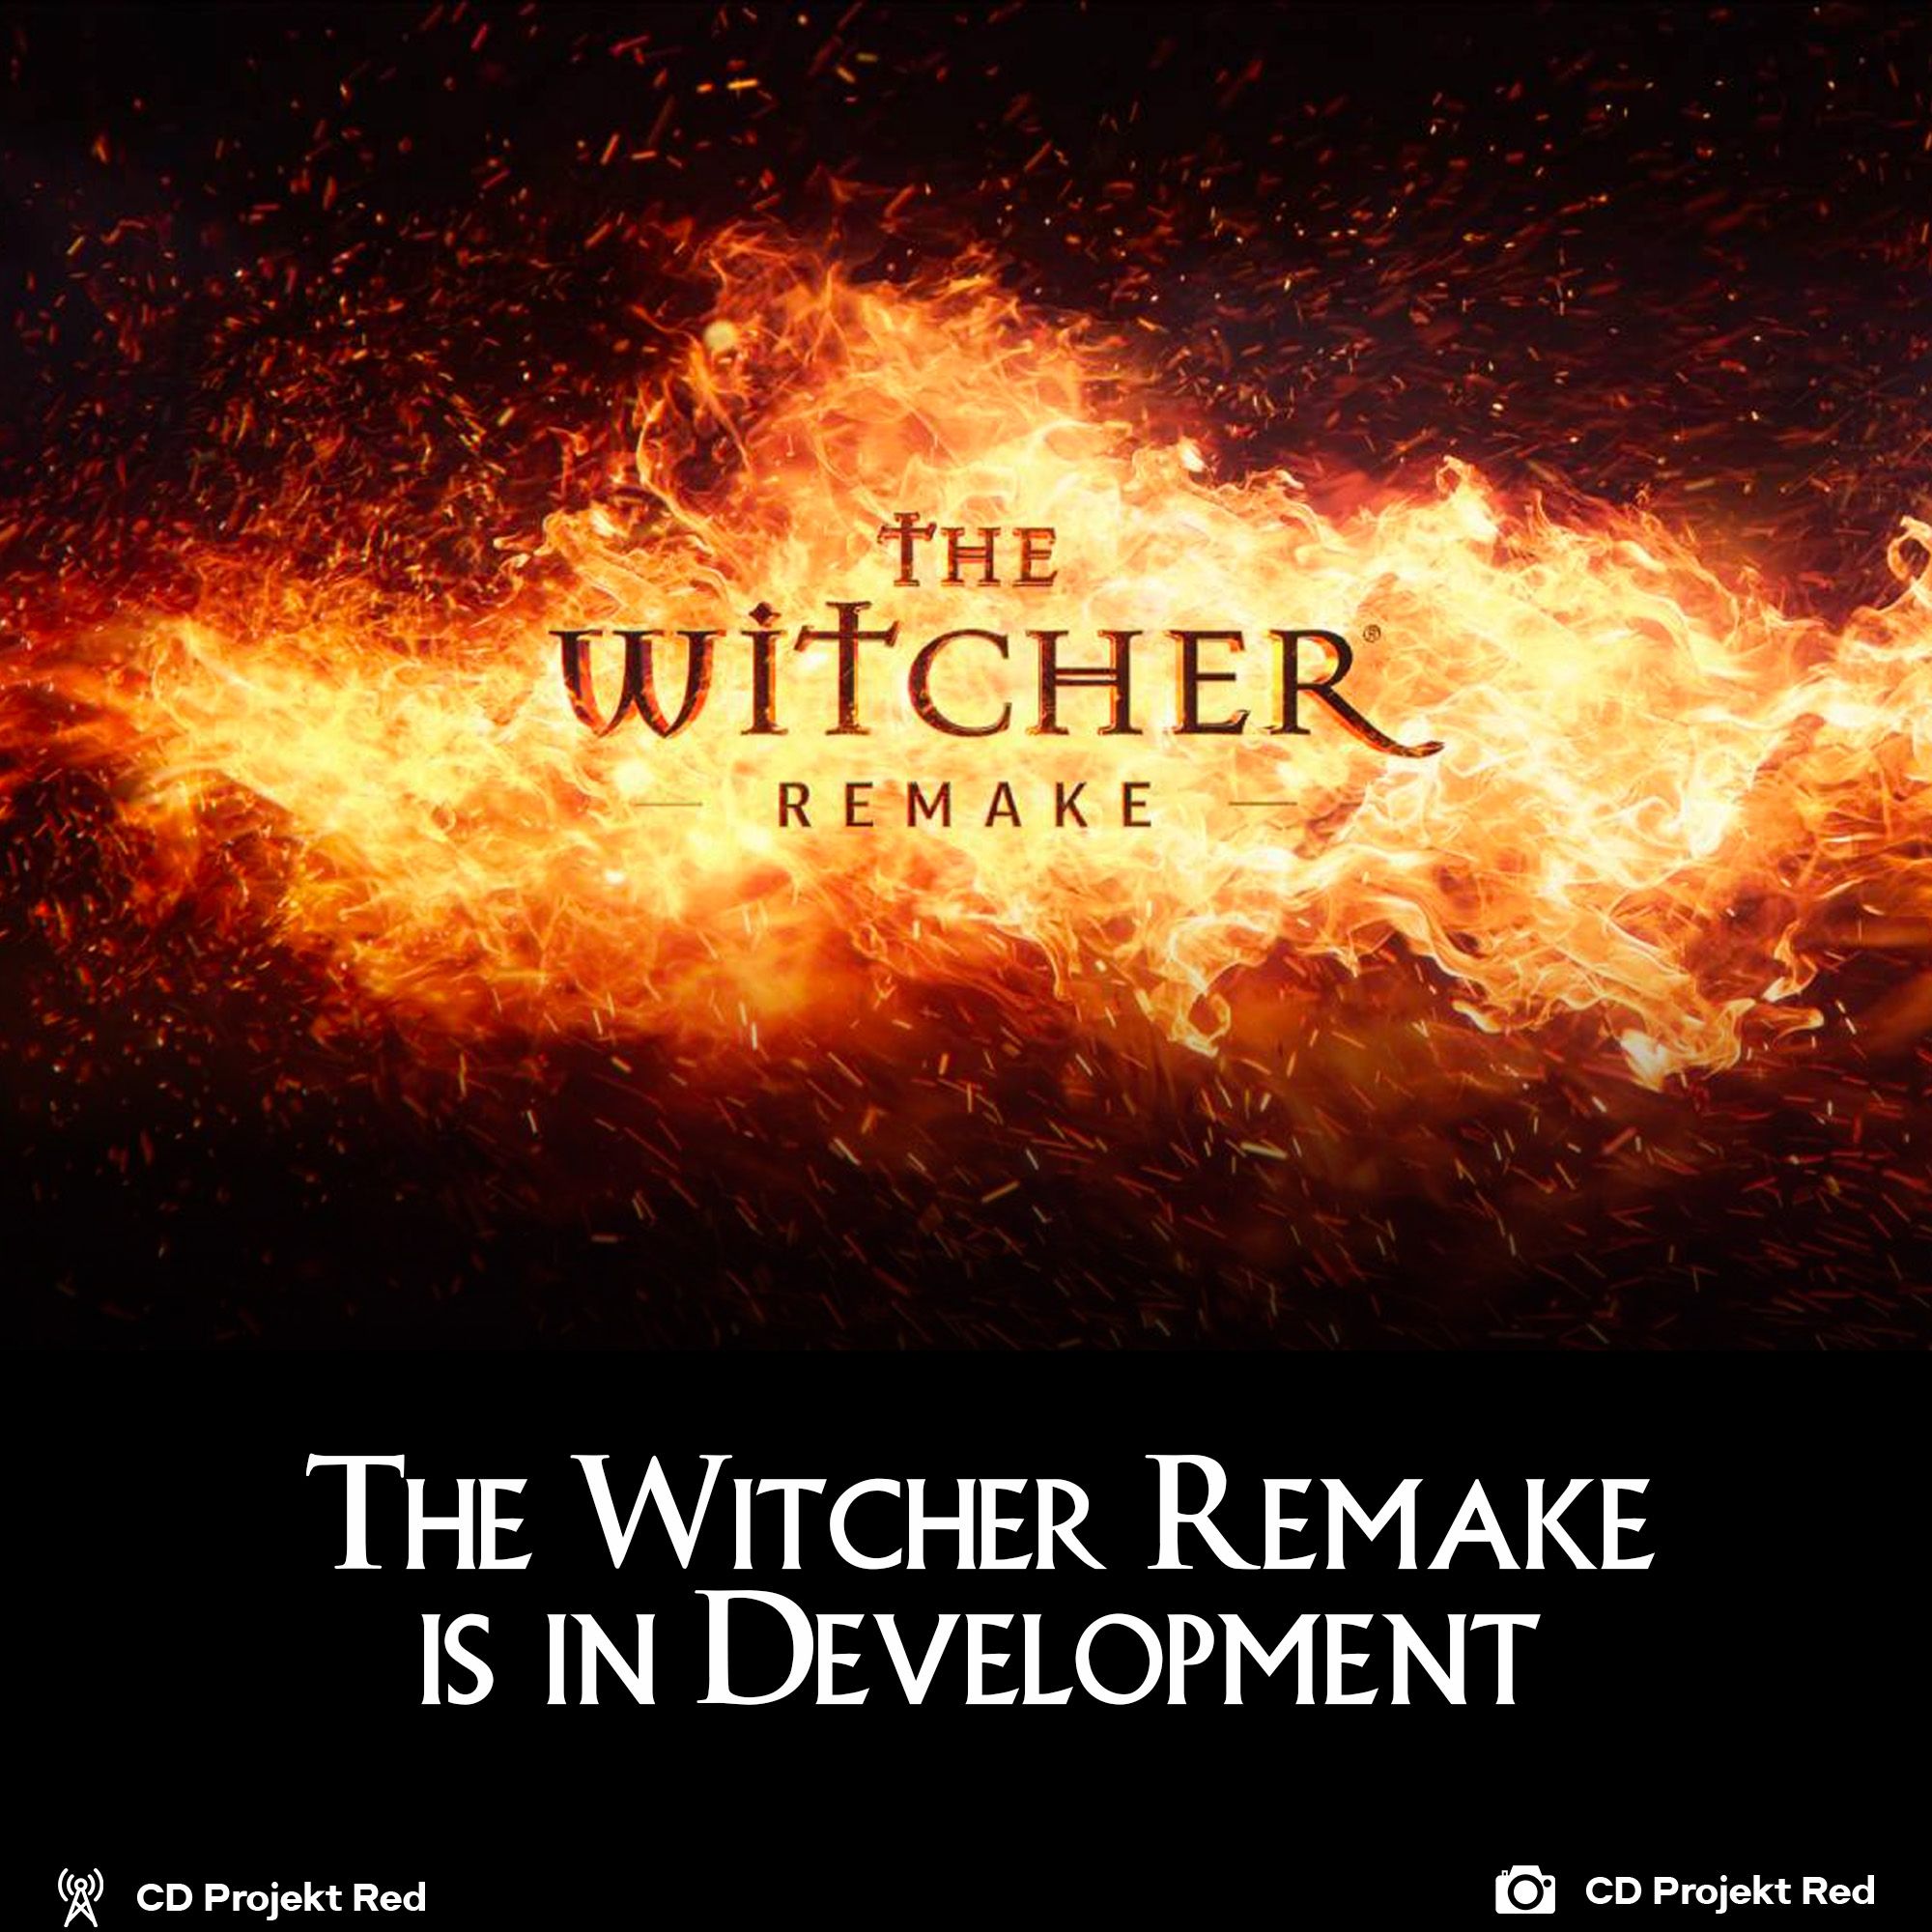 The Witcher reamke